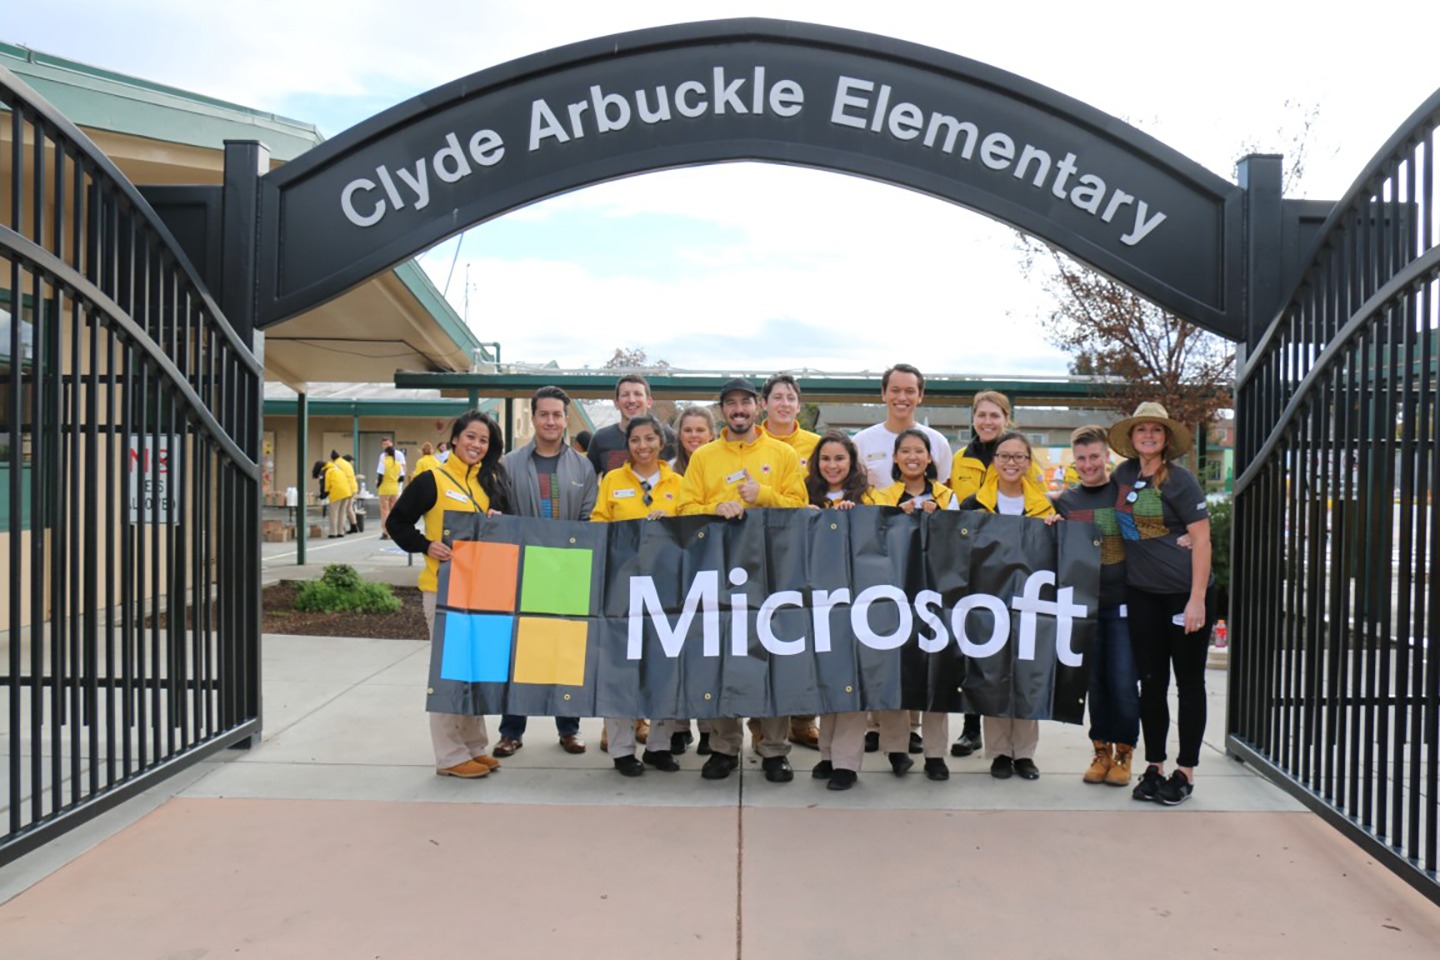 Group of AmeriCorps members holding a large Microsoft banner in front of a school team sponsor